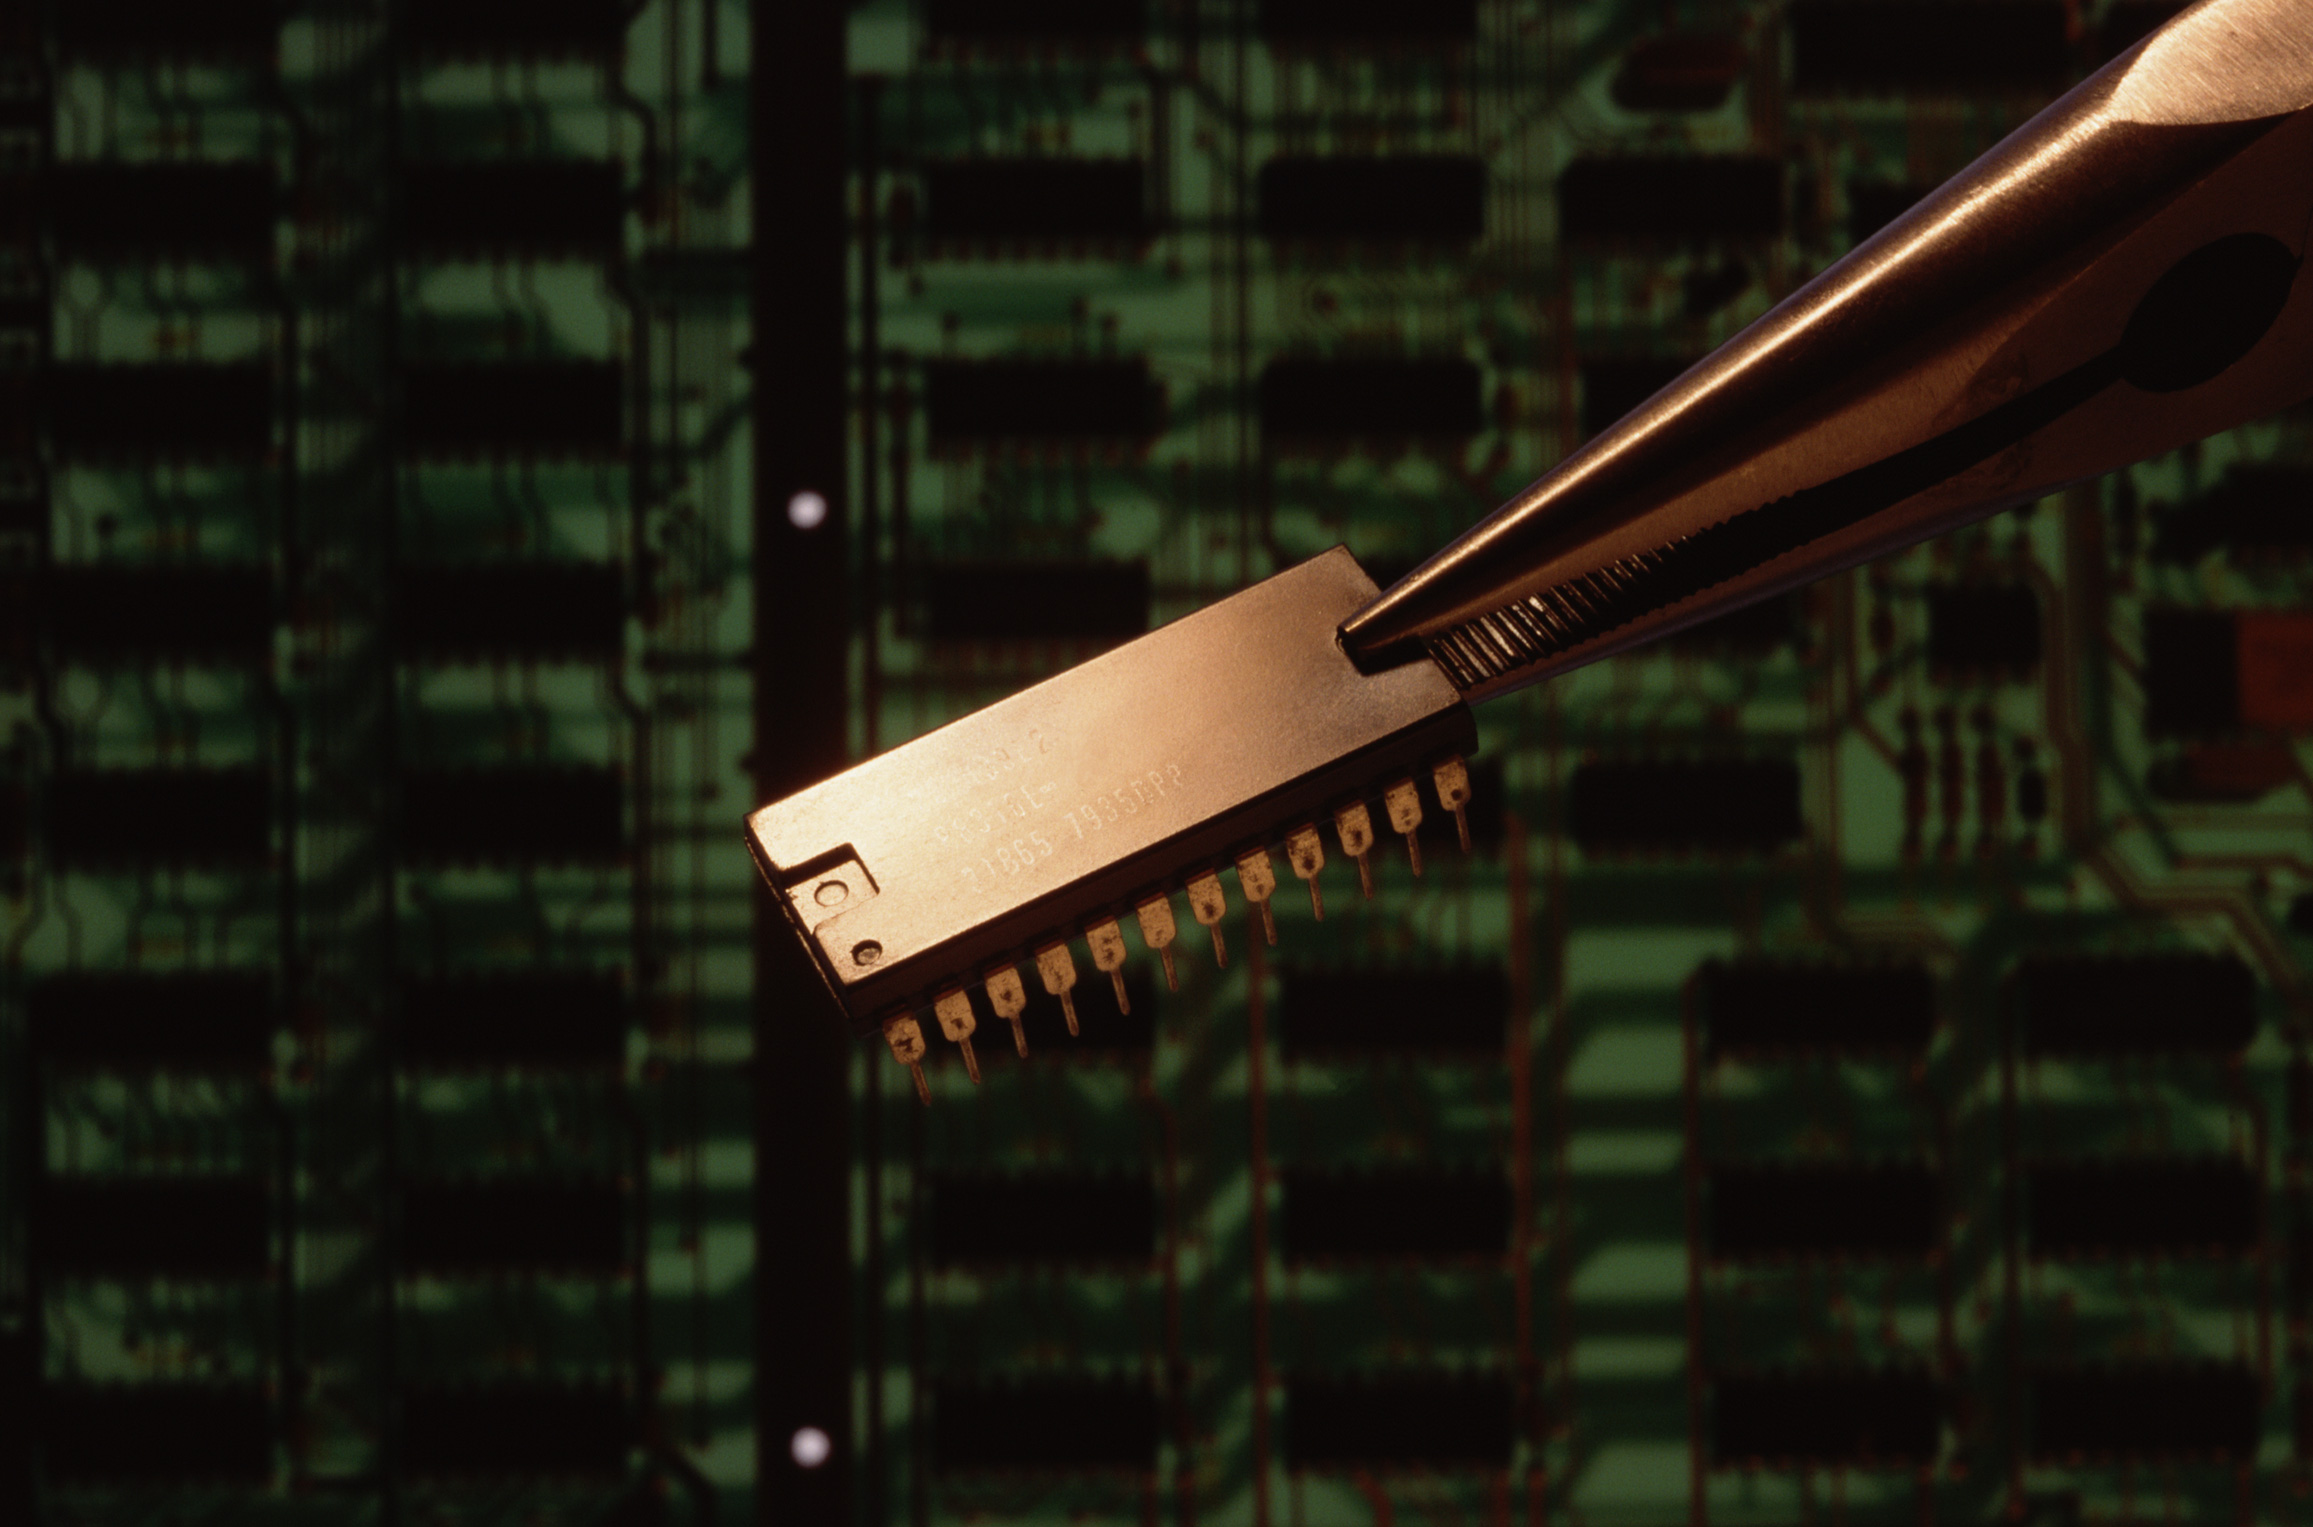 a computer chip, held by tweezers against a black and green background